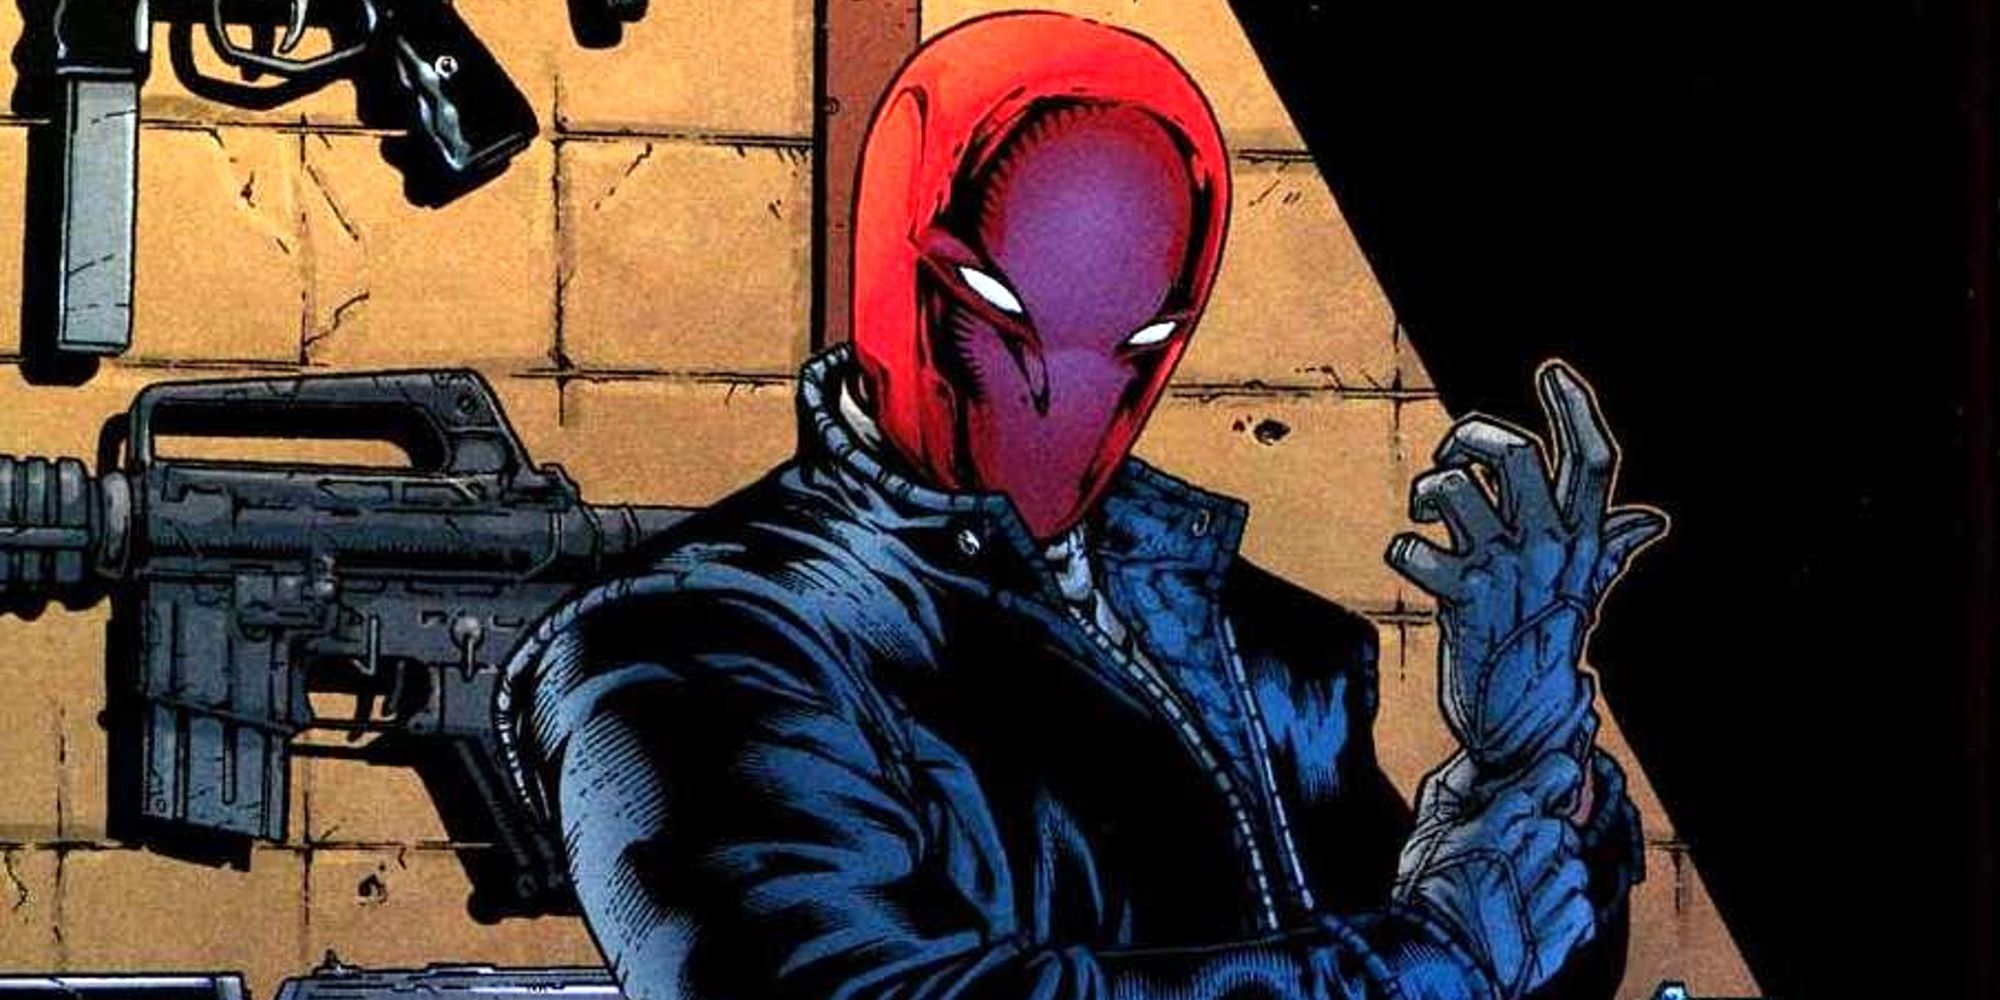 Red Hood in front of his arsenal in Batman Under The Red Hood comic